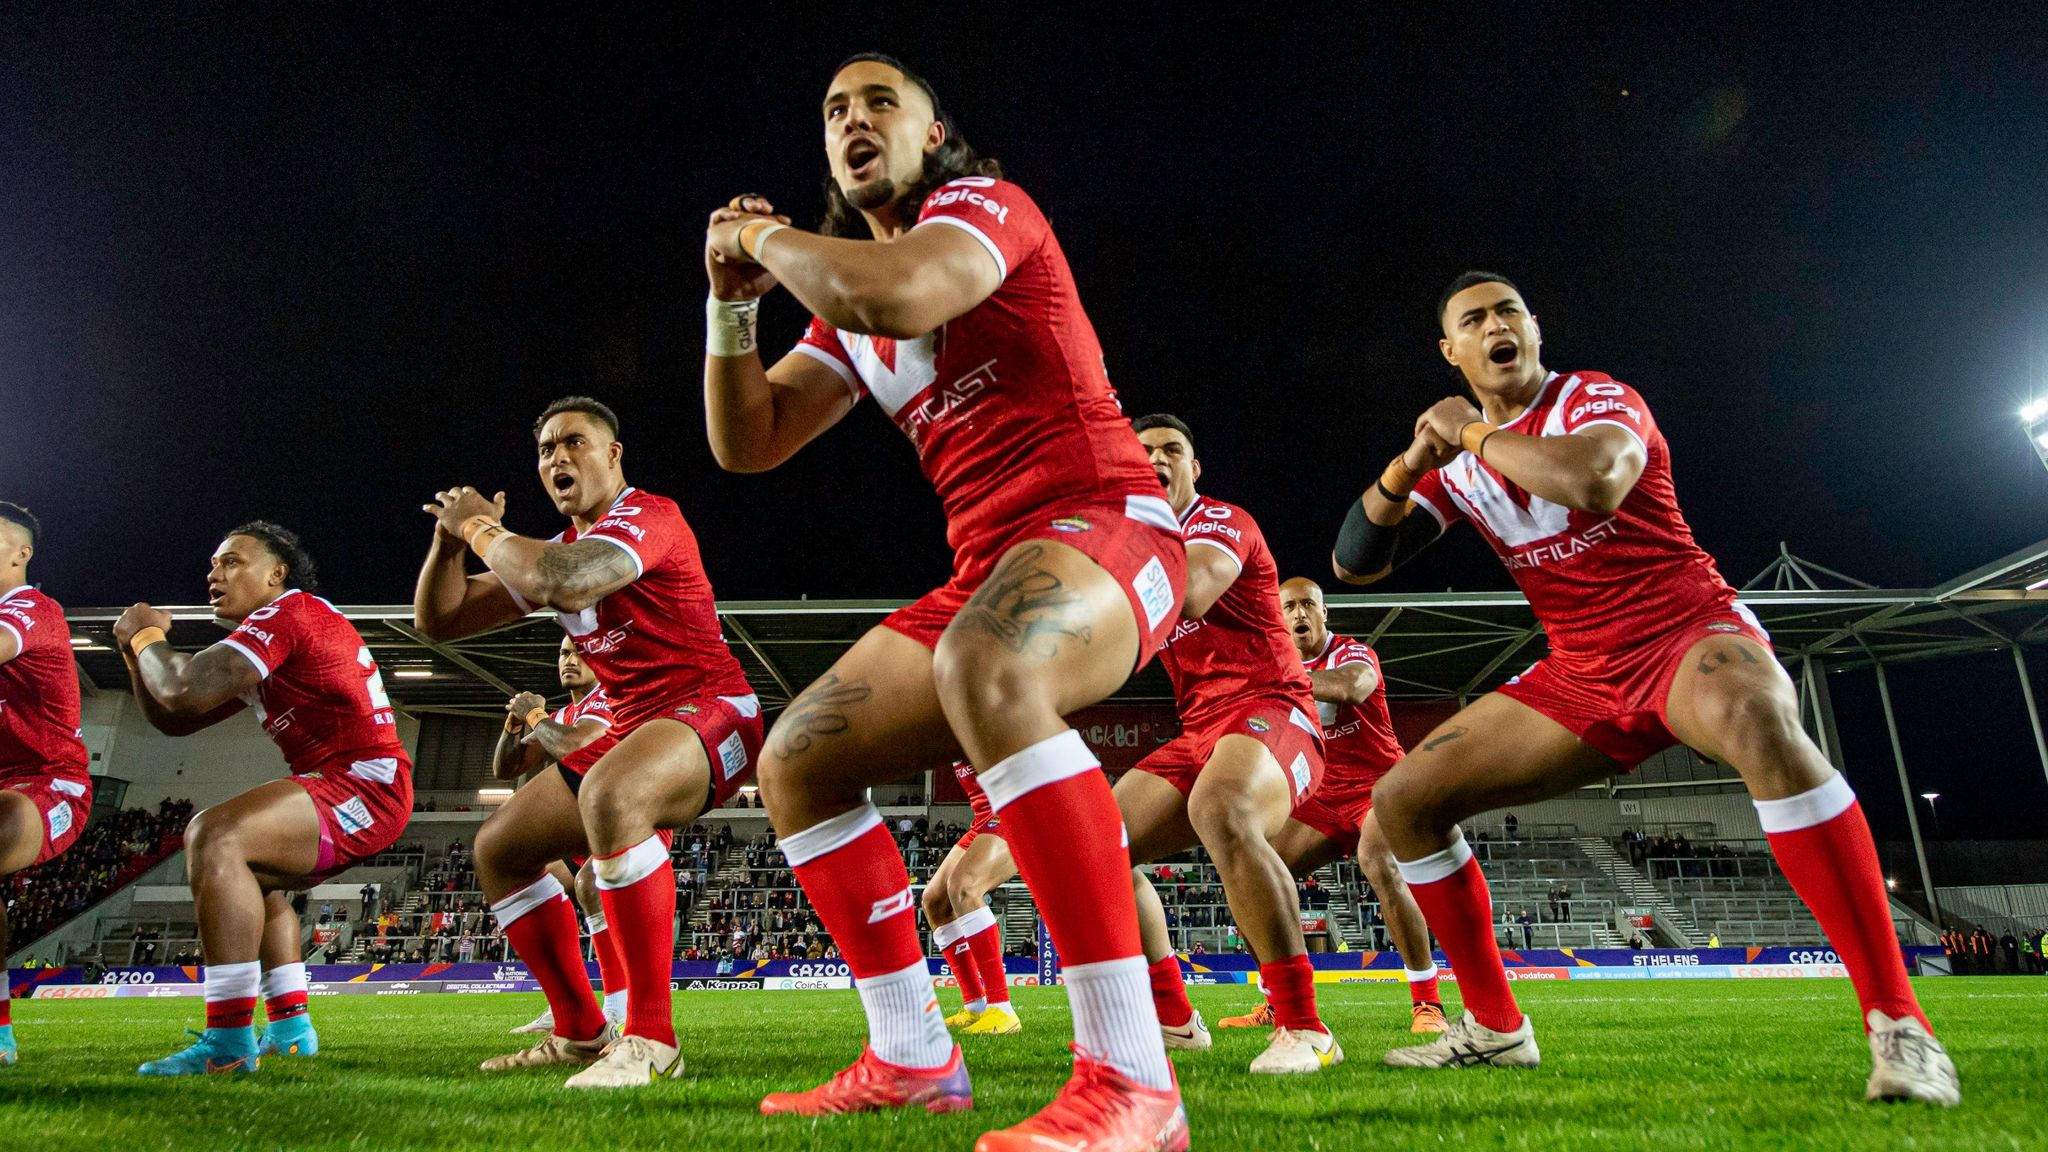 England vs Tonga Former St Helens head coach Kristian Woolf relishing leading Tongans on historic tour Rugby League News Sky Sports